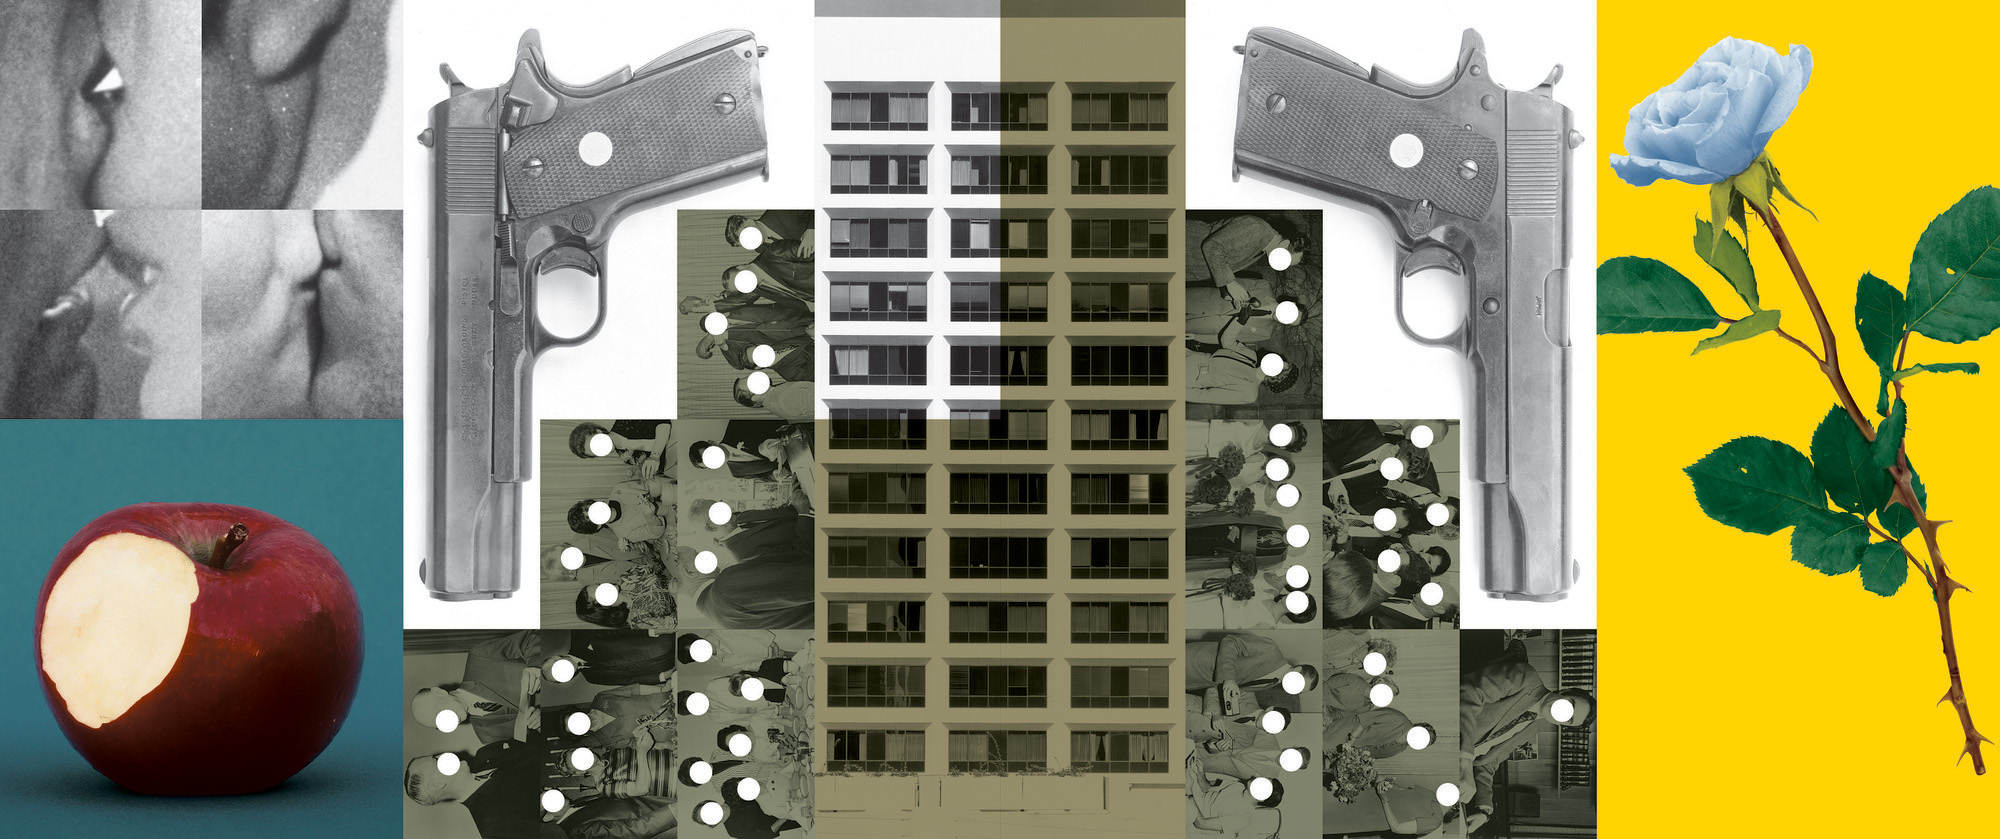 John Baldessari, <em>Buildings=Guns=People: Desire, Knowledge, and Hope (with Smog)</em>, 1985/1989. Black-and-white photographs, color photographs, vinyl paint, oil tint, 15.5 x 37 ft. Courtesy of the artist.